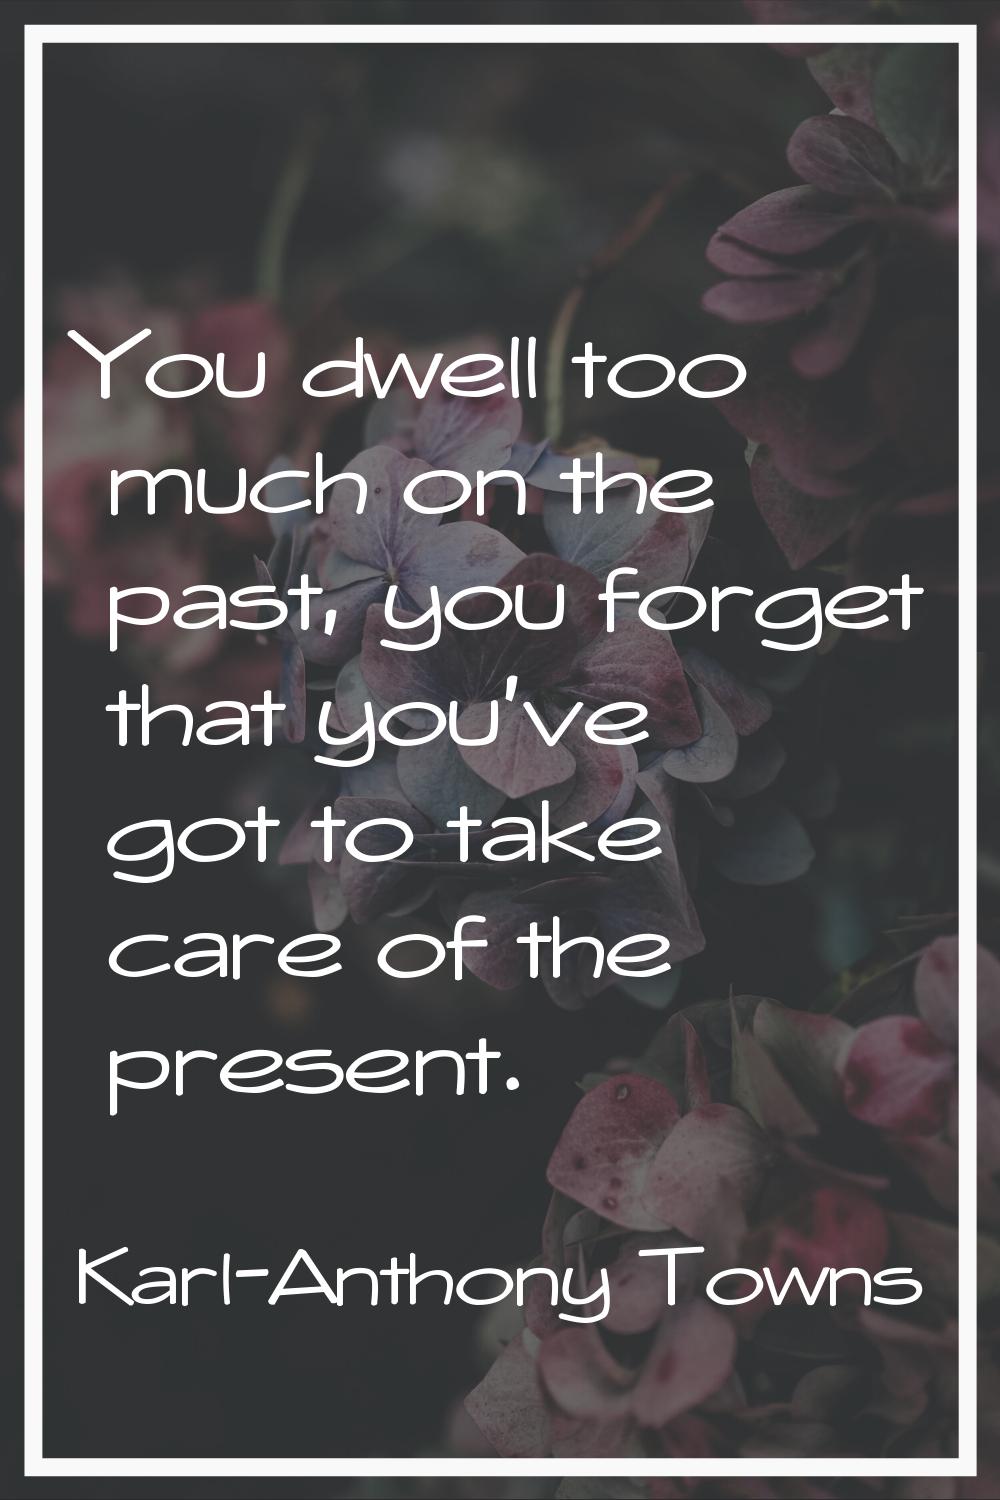 You dwell too much on the past, you forget that you've got to take care of the present.